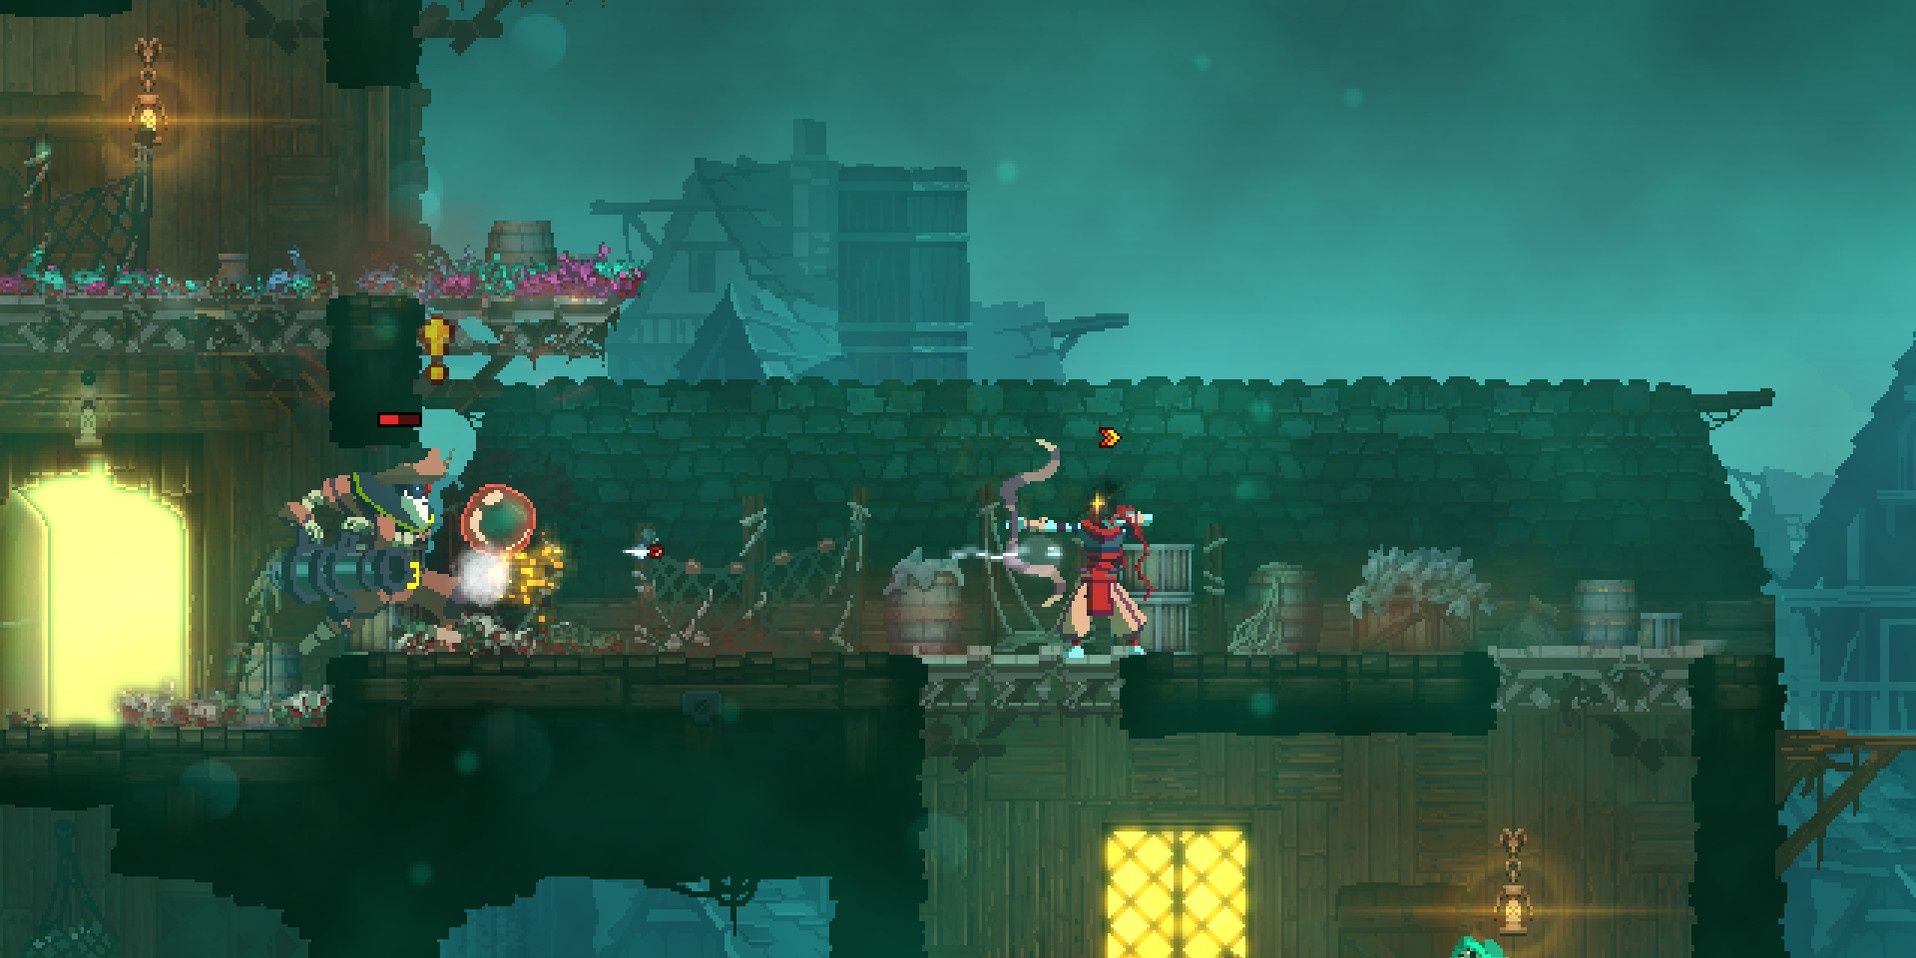 A player holding a bow and arrow about to shoot an enemy in Dead Cells